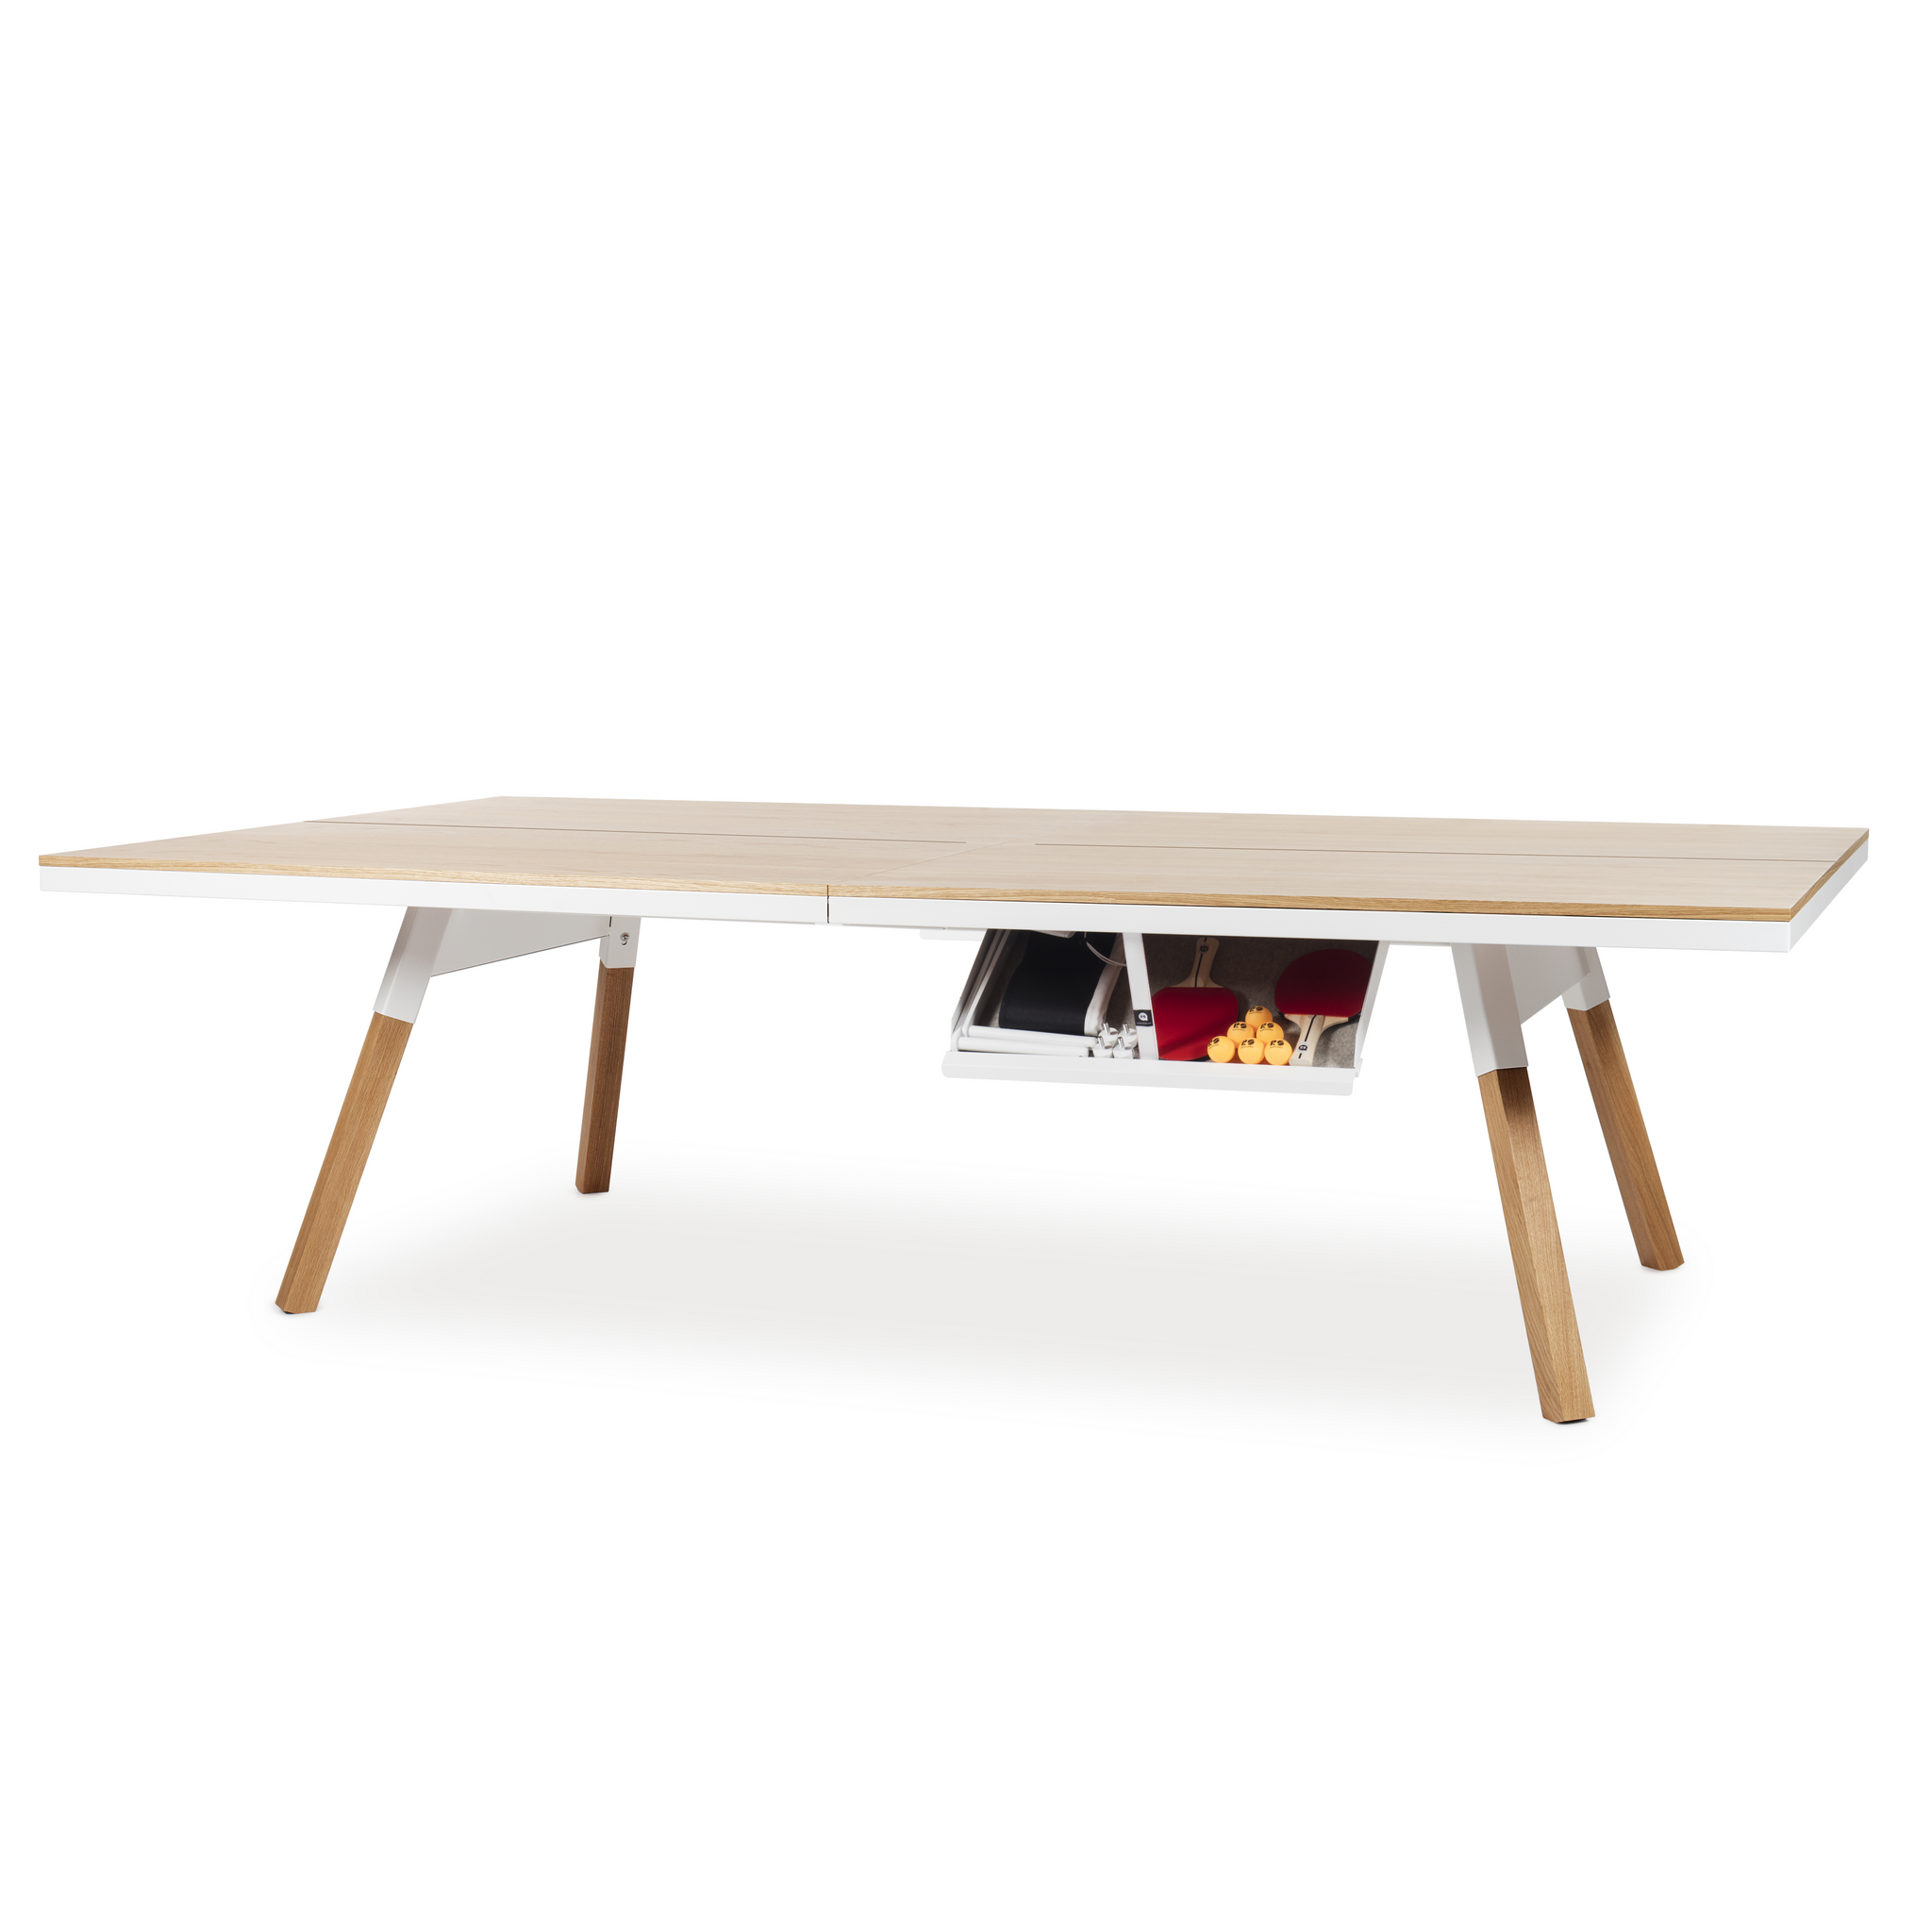 You and Me Tournament Size Table Tennis in Oak & White